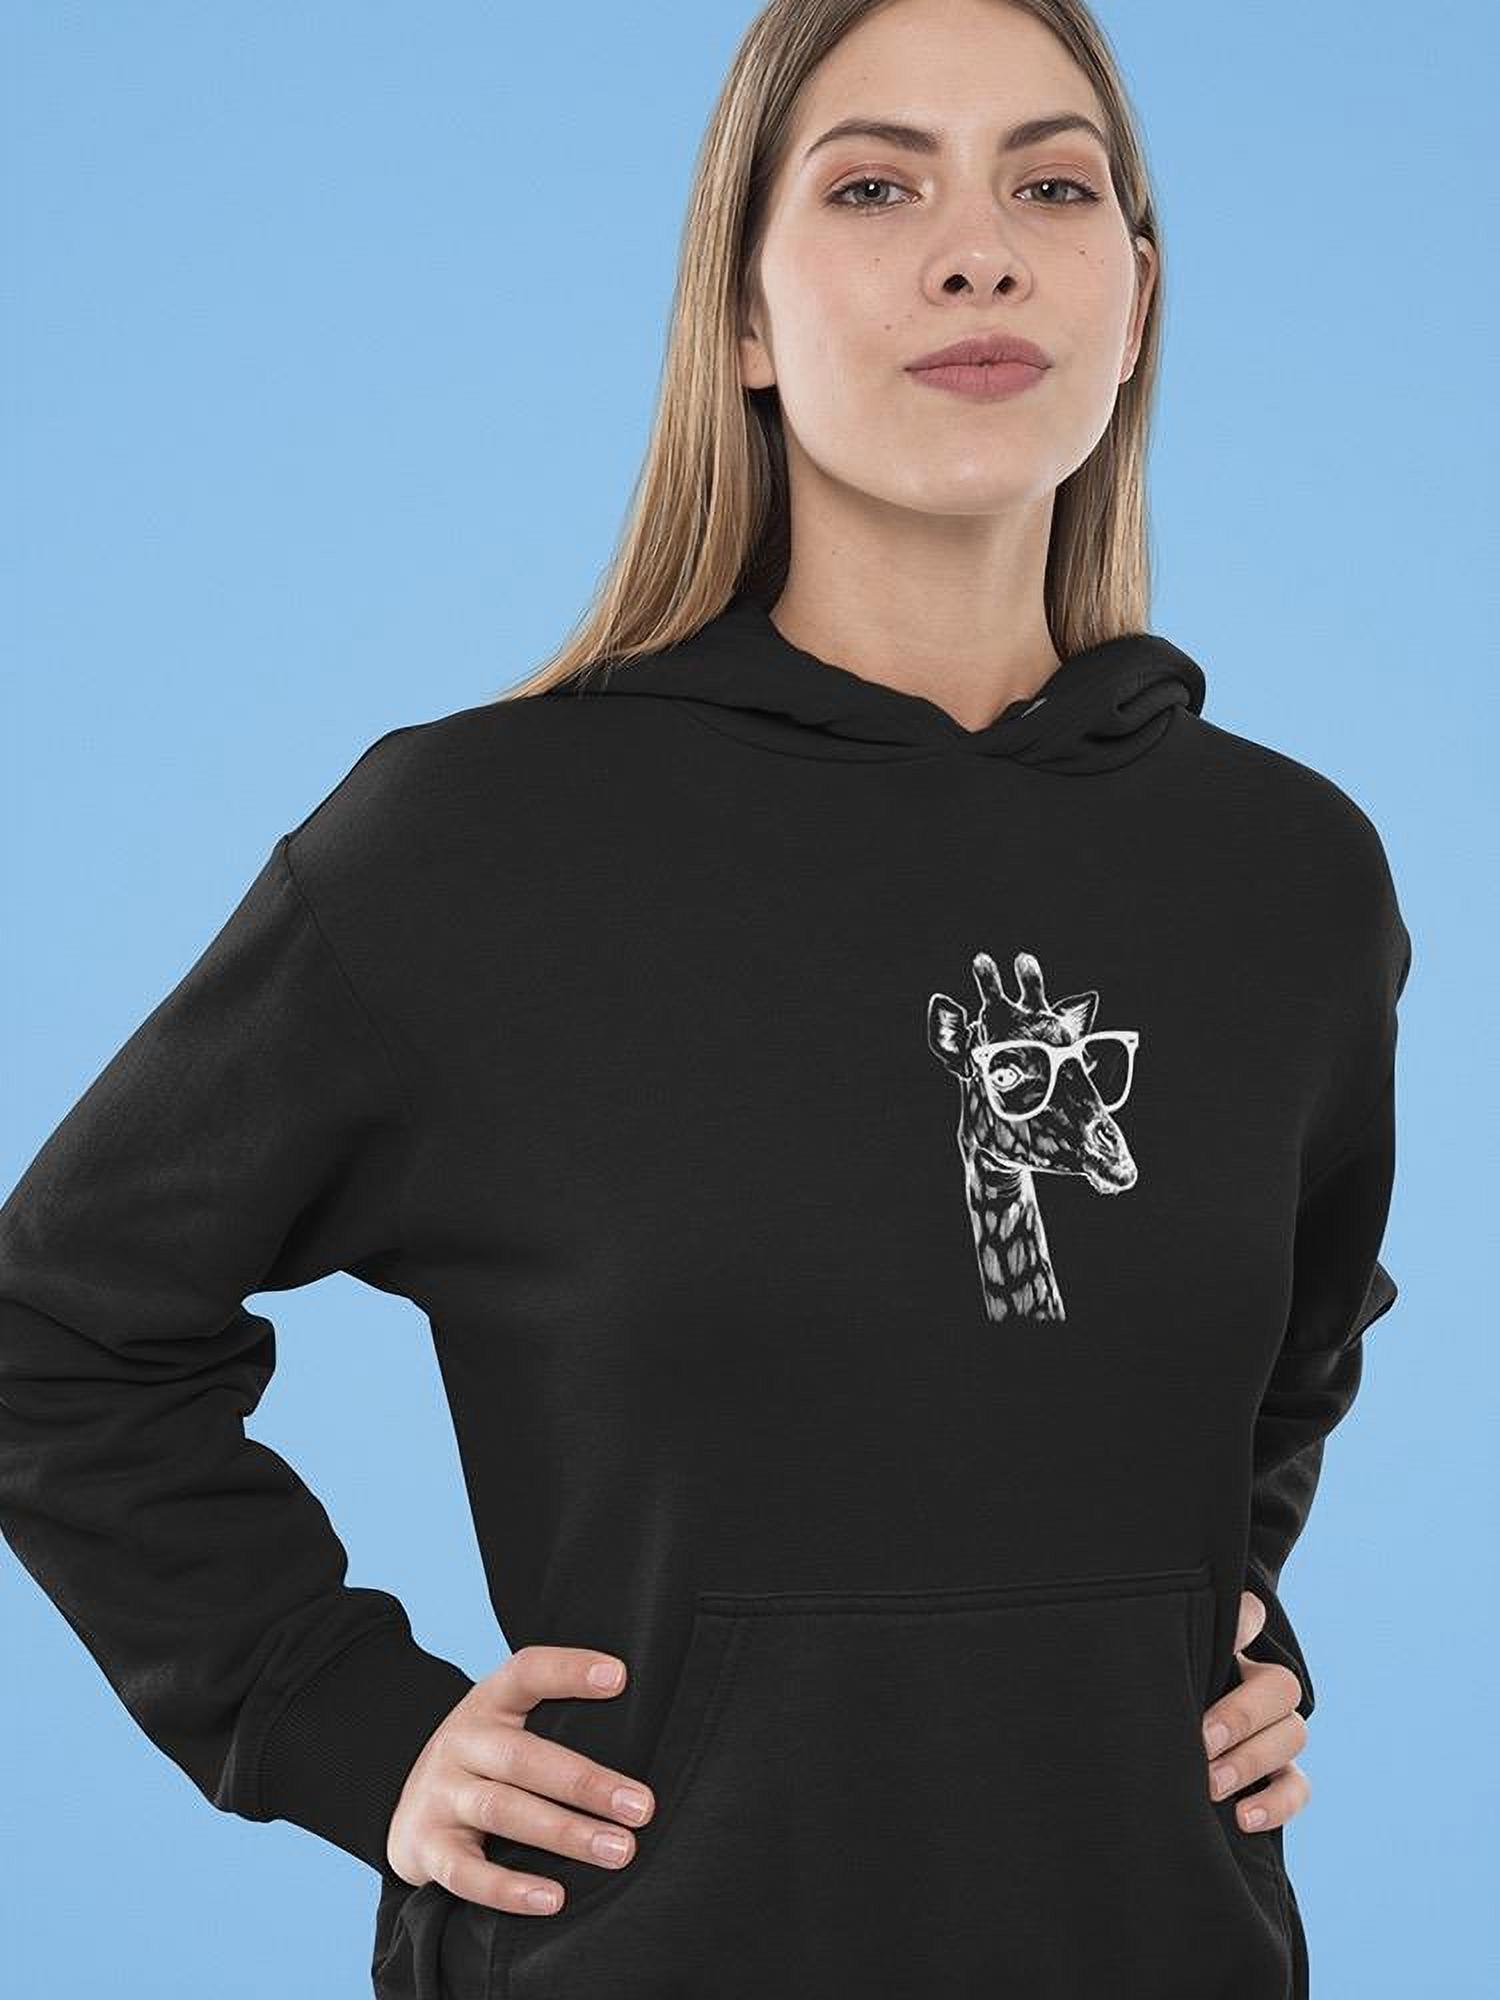 Cool Giraffe With Shades Hoodie Women -GoatDeals Designs, Female x-Large - image 2 of 4